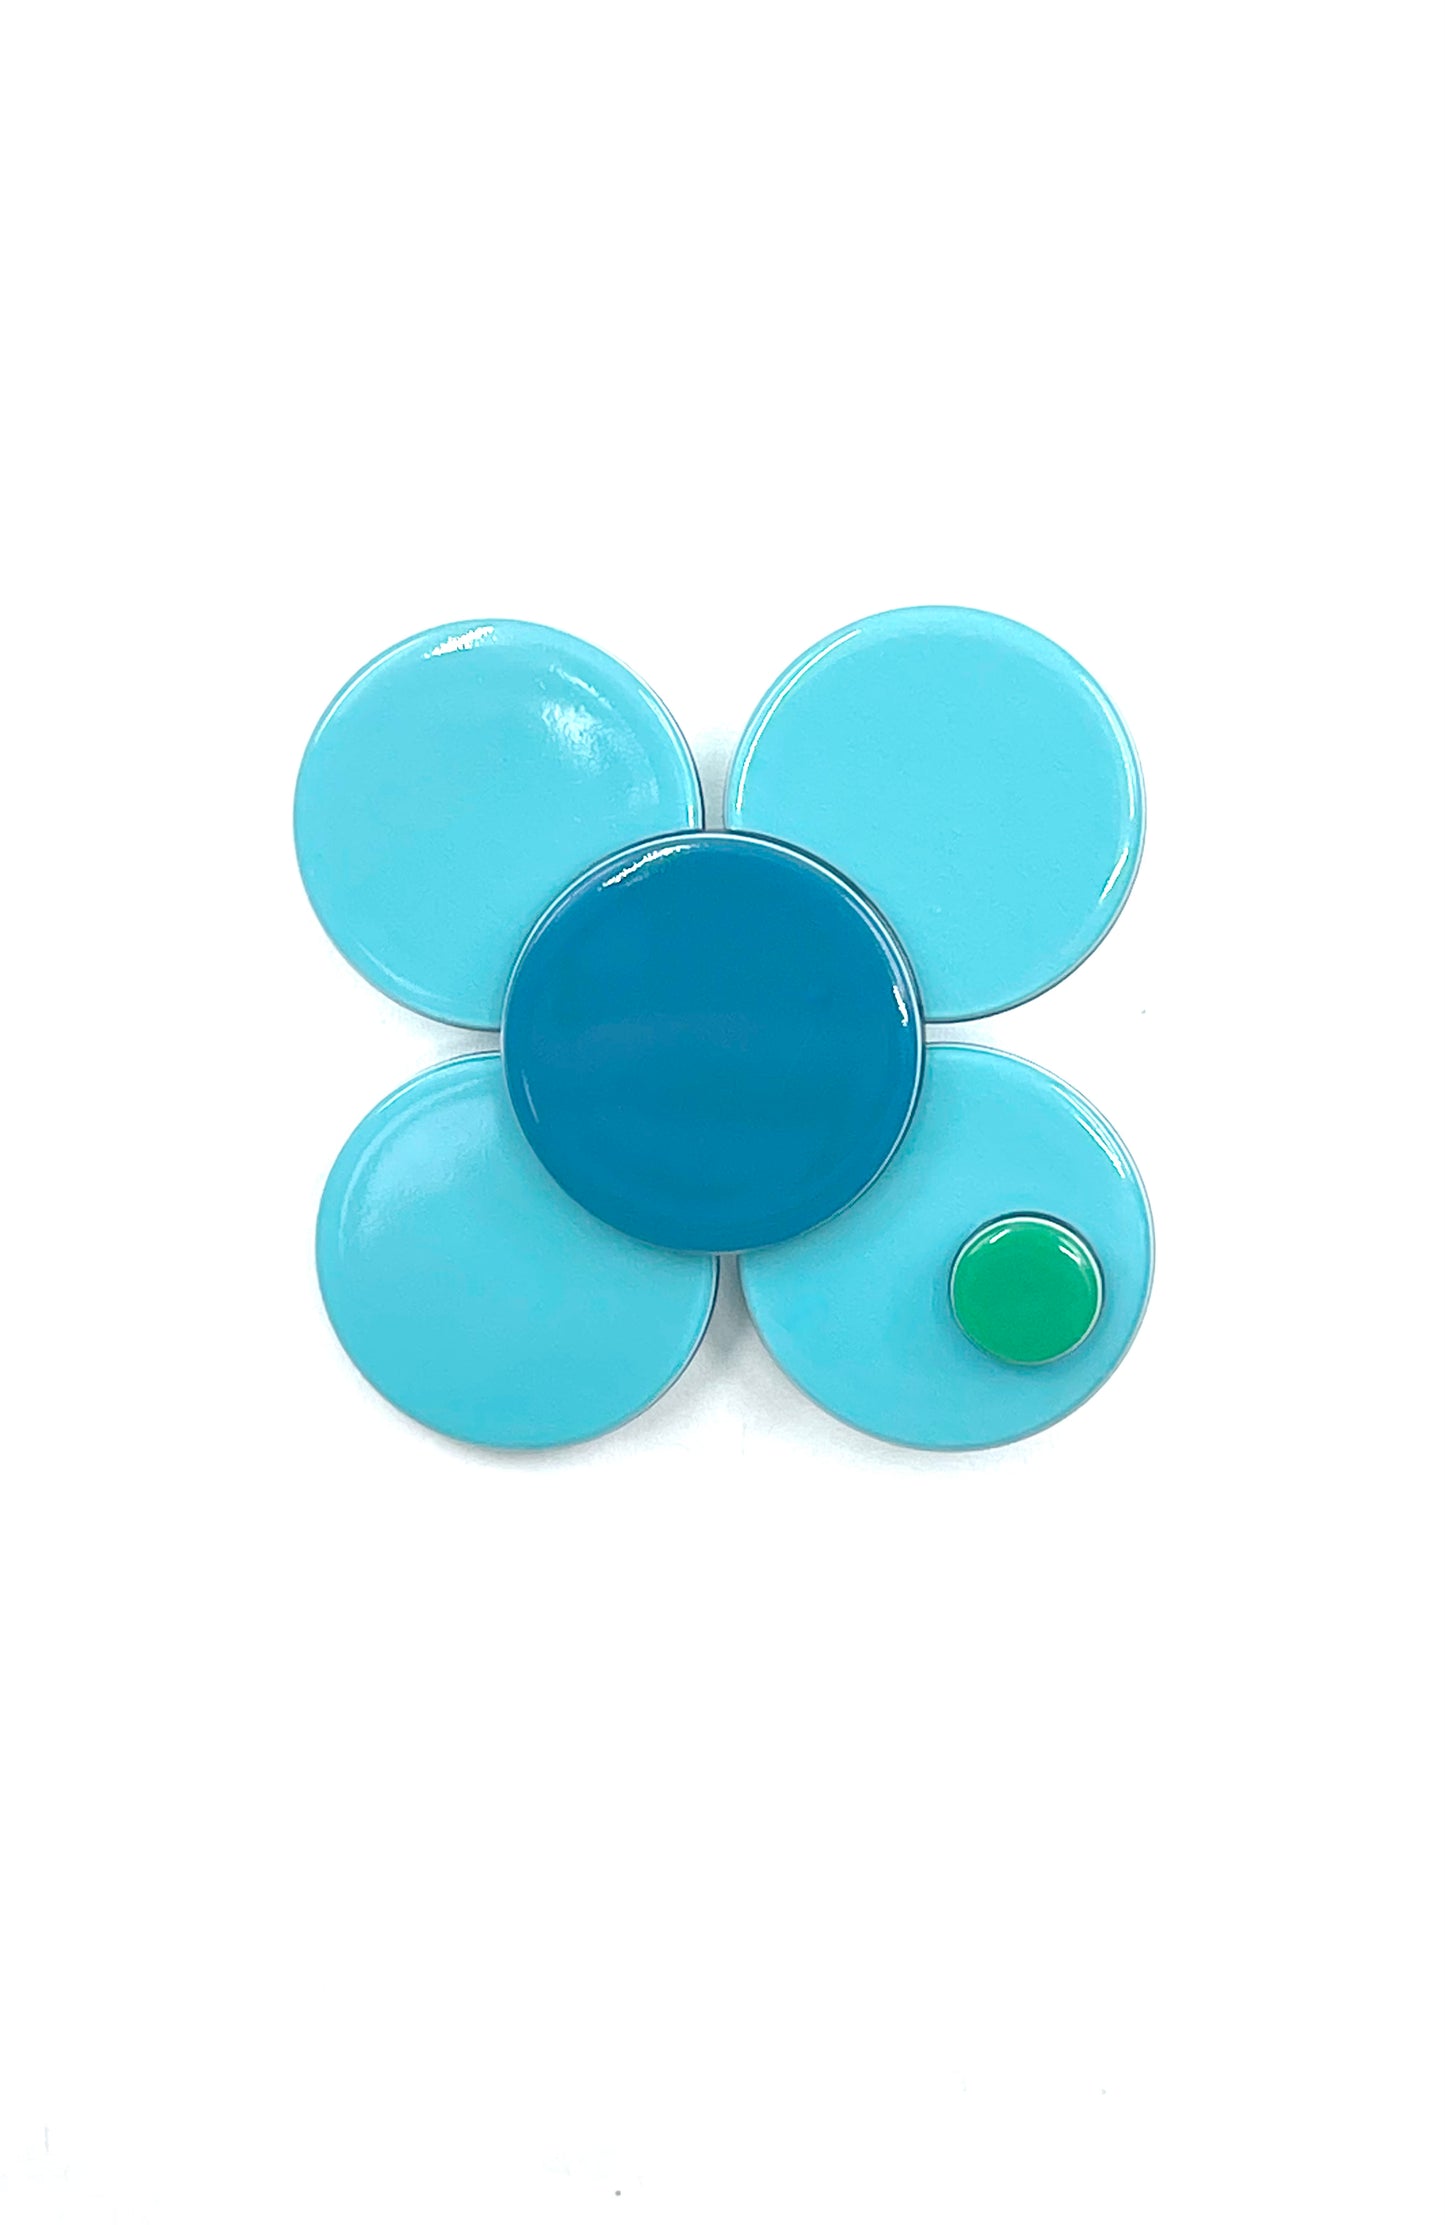 Florence flower - Blue turquoise